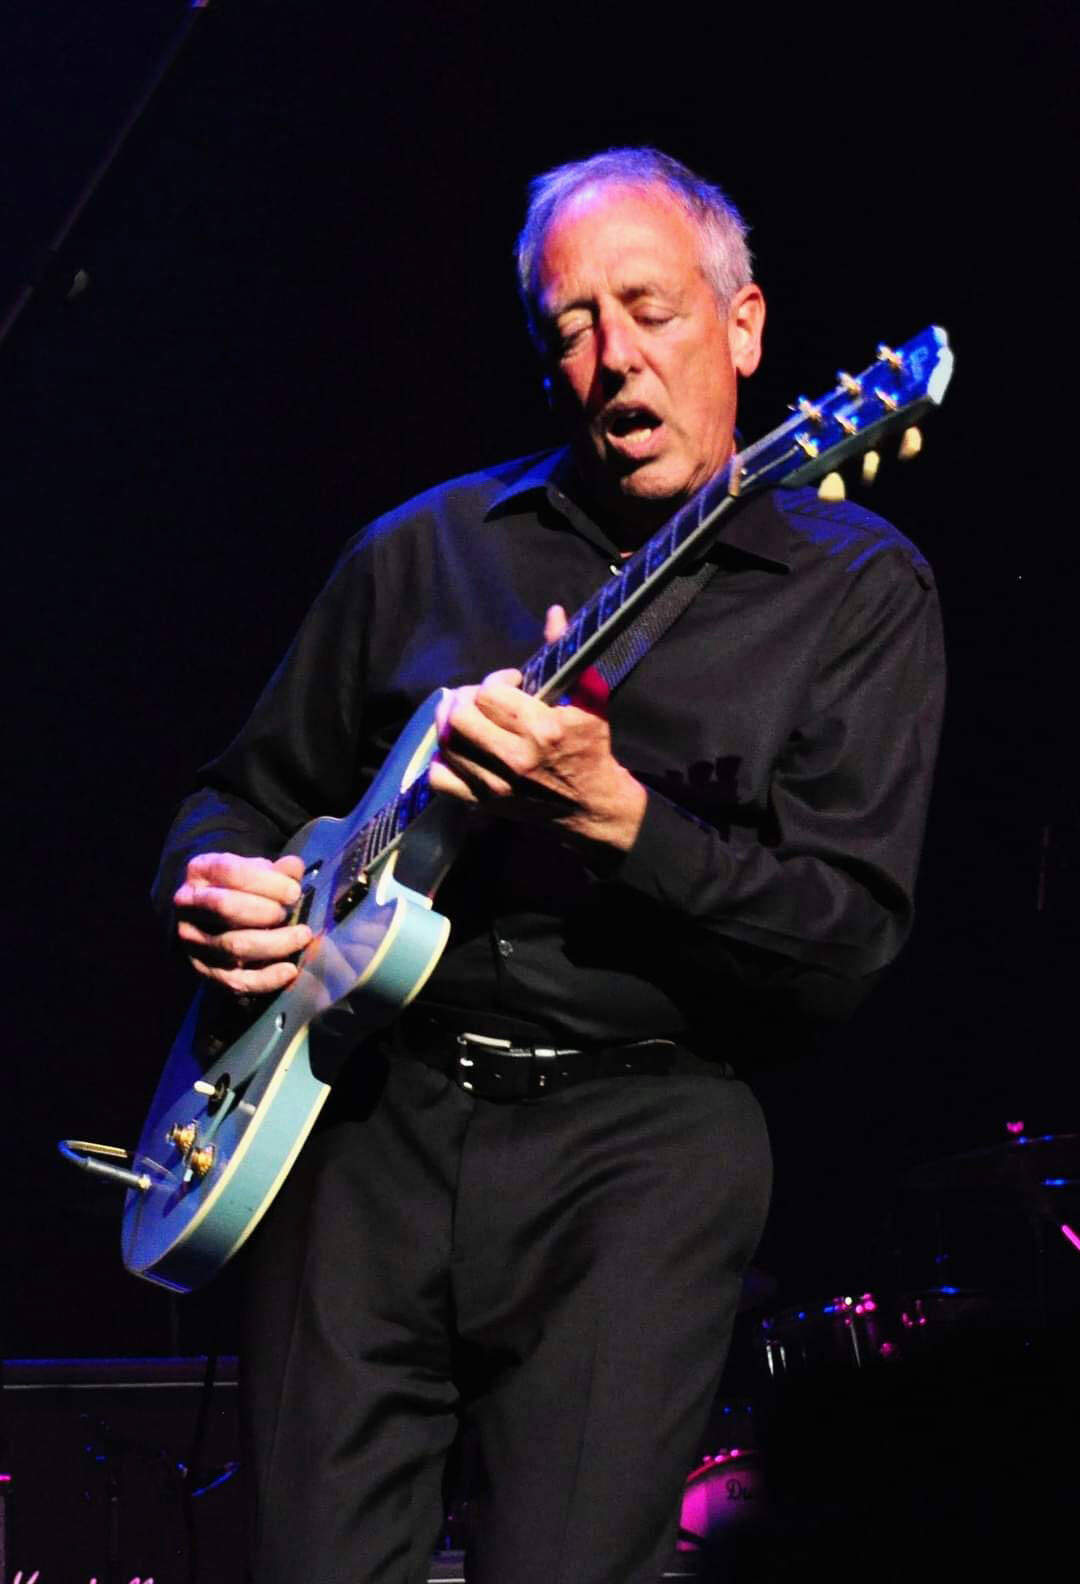 Tom Lavin of the Powder Blues performs at a cancer benefit concert at the Hard Rock Casino Show Theatre on Oct. 1. (Dee Lippingwell Photography)